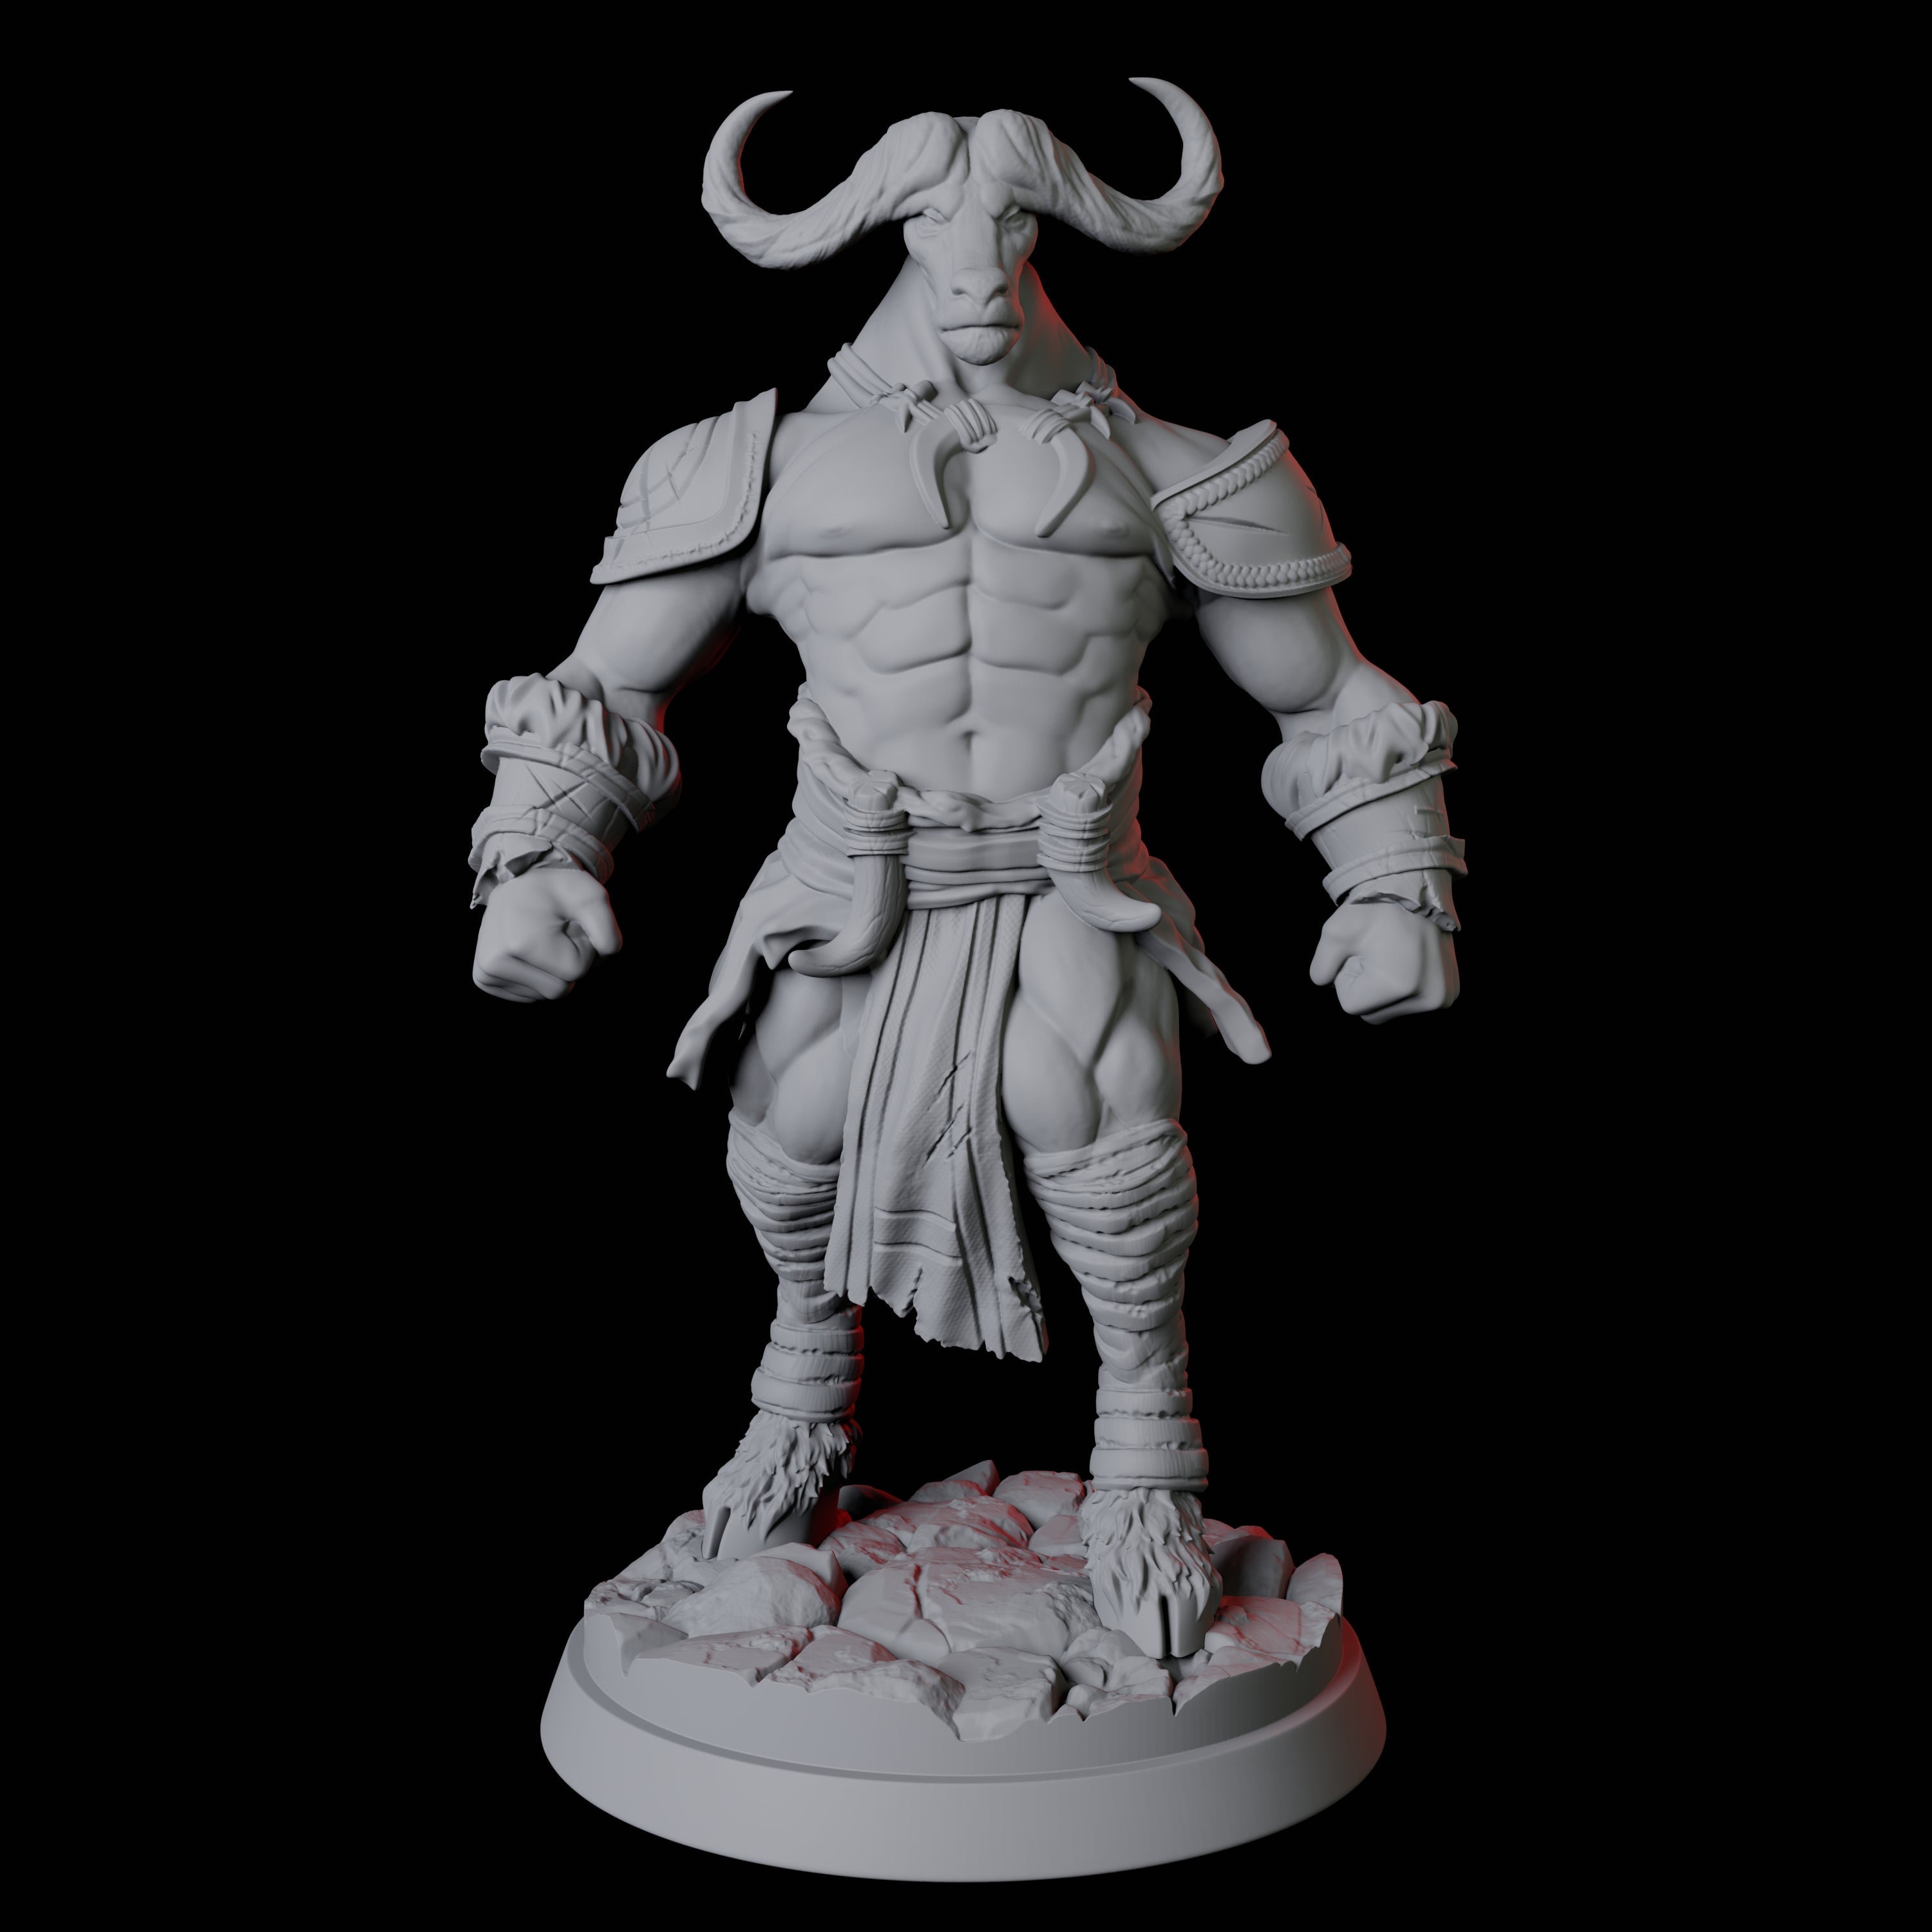 Ten Yakfolk Bundle Miniature for Dungeons and Dragons, Pathfinder or other TTRPGs